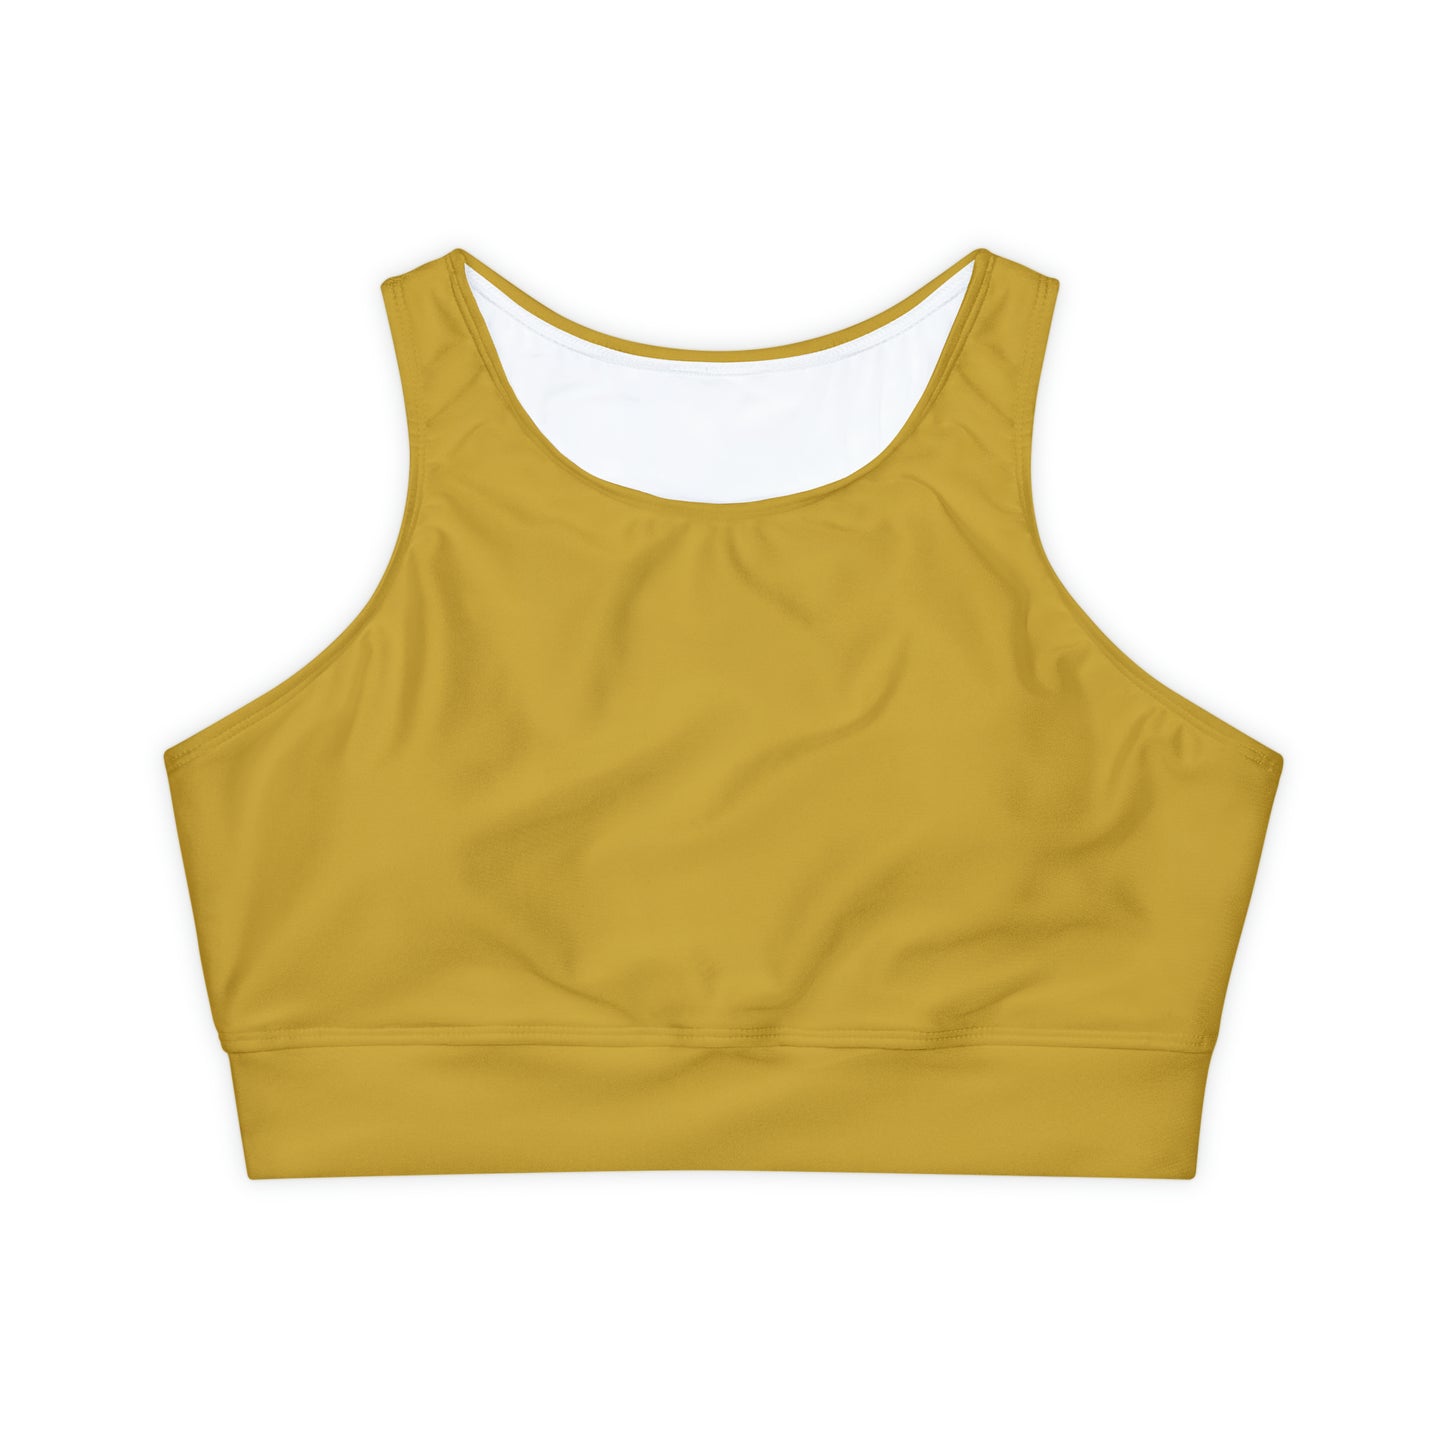 Metallic Gold Fully Lined, Padded Sports Bra